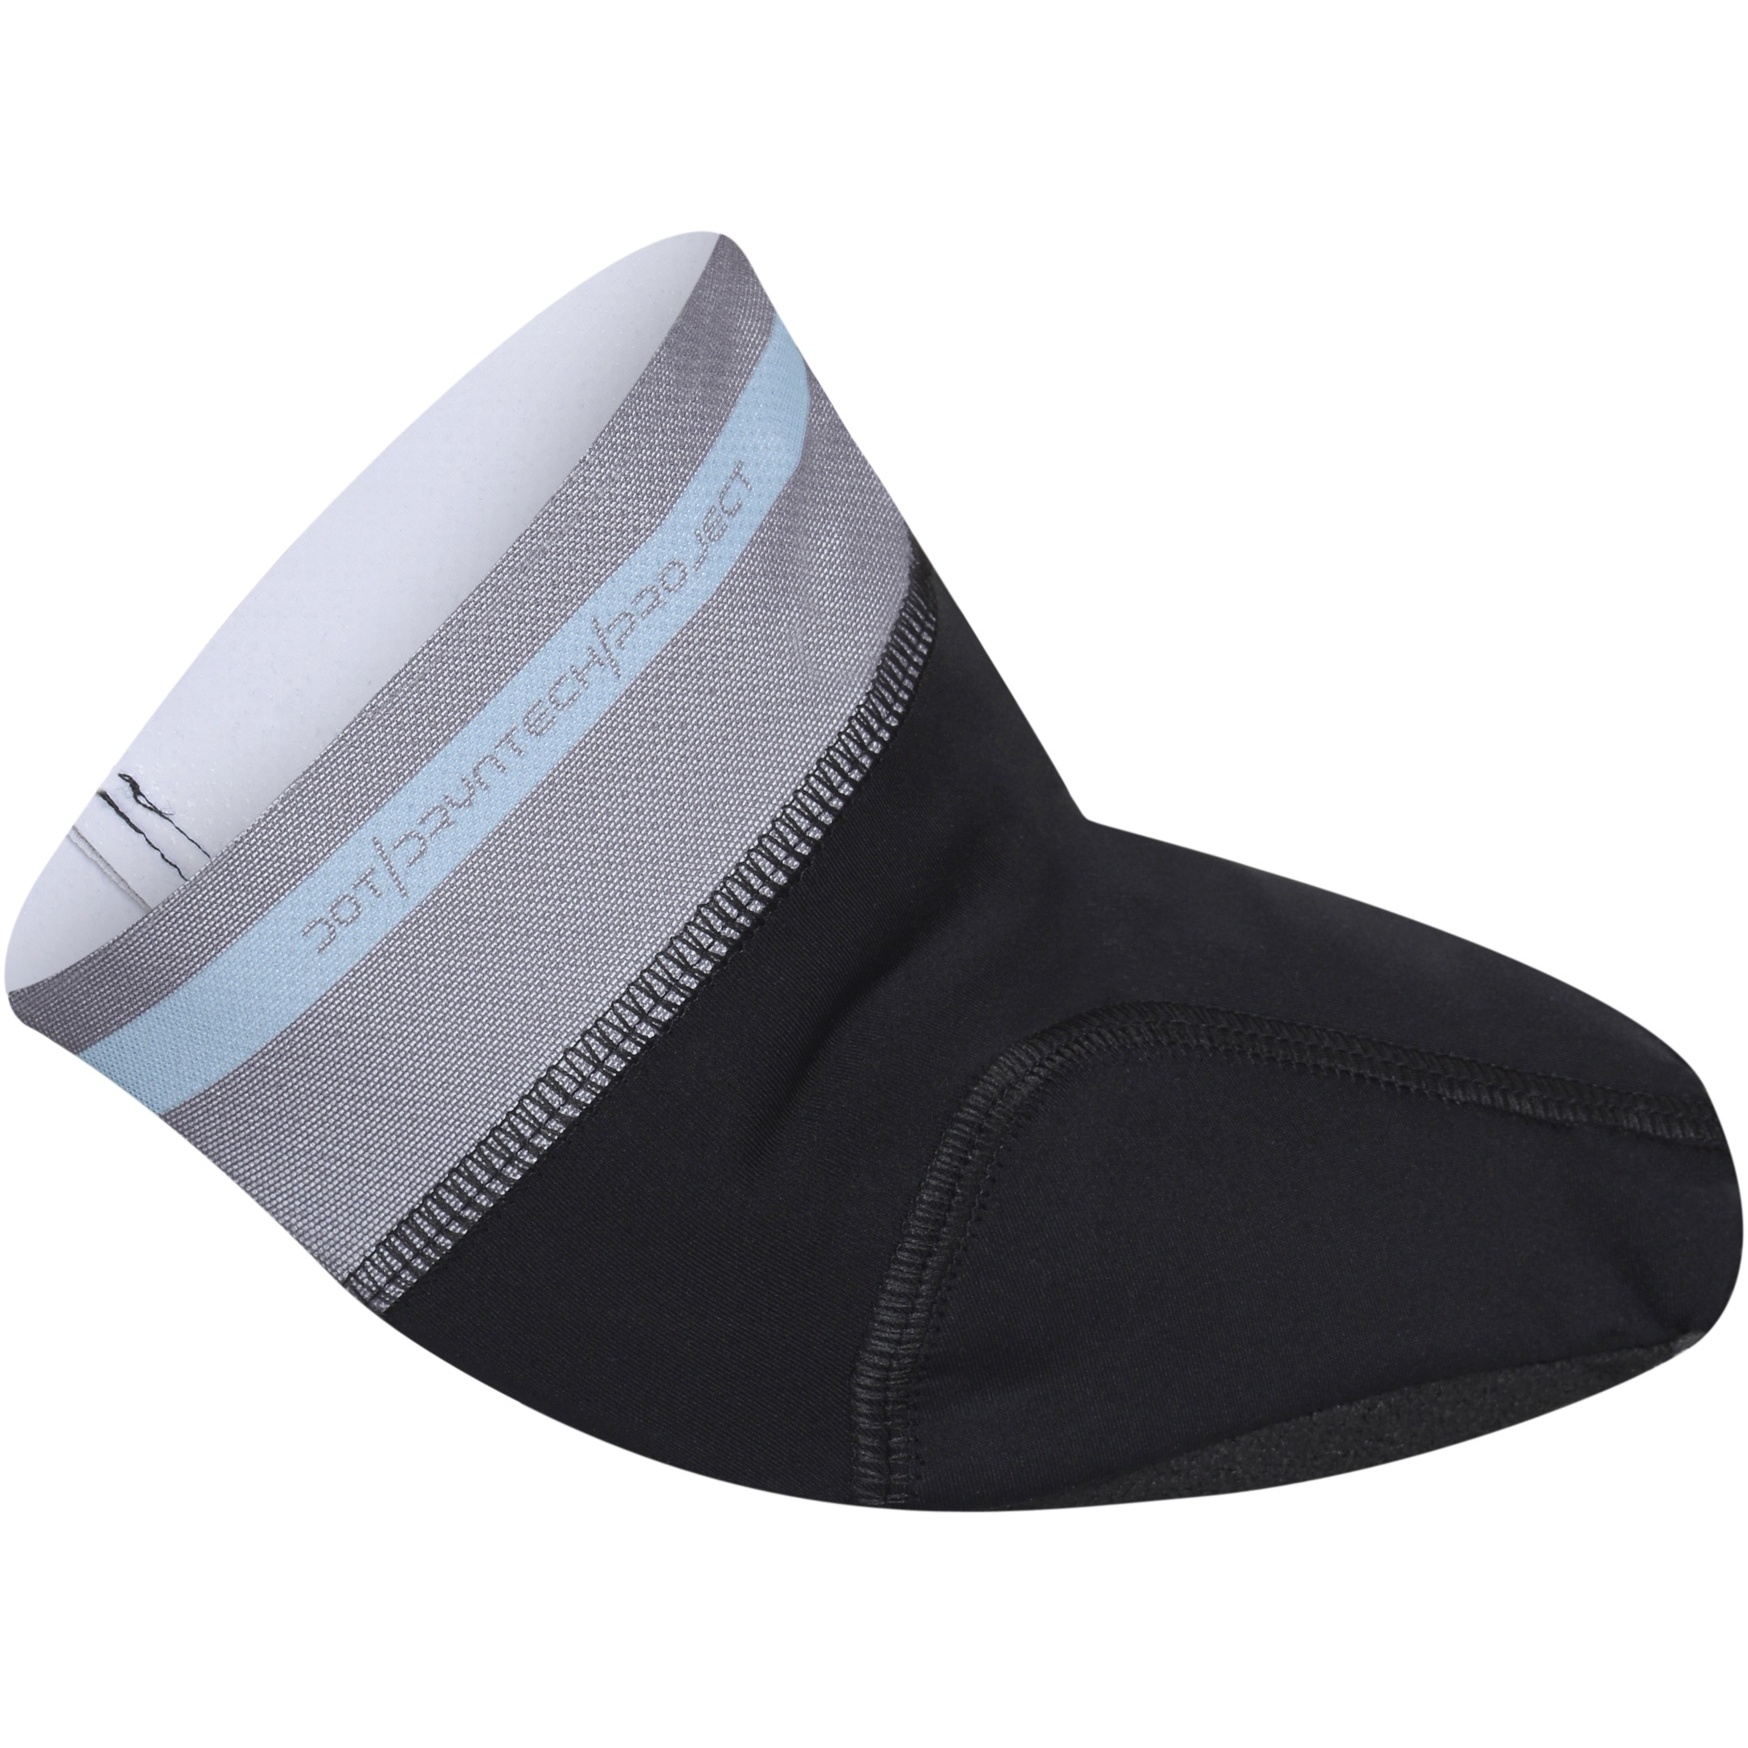 Picture of Dotout Twister Toecover - black